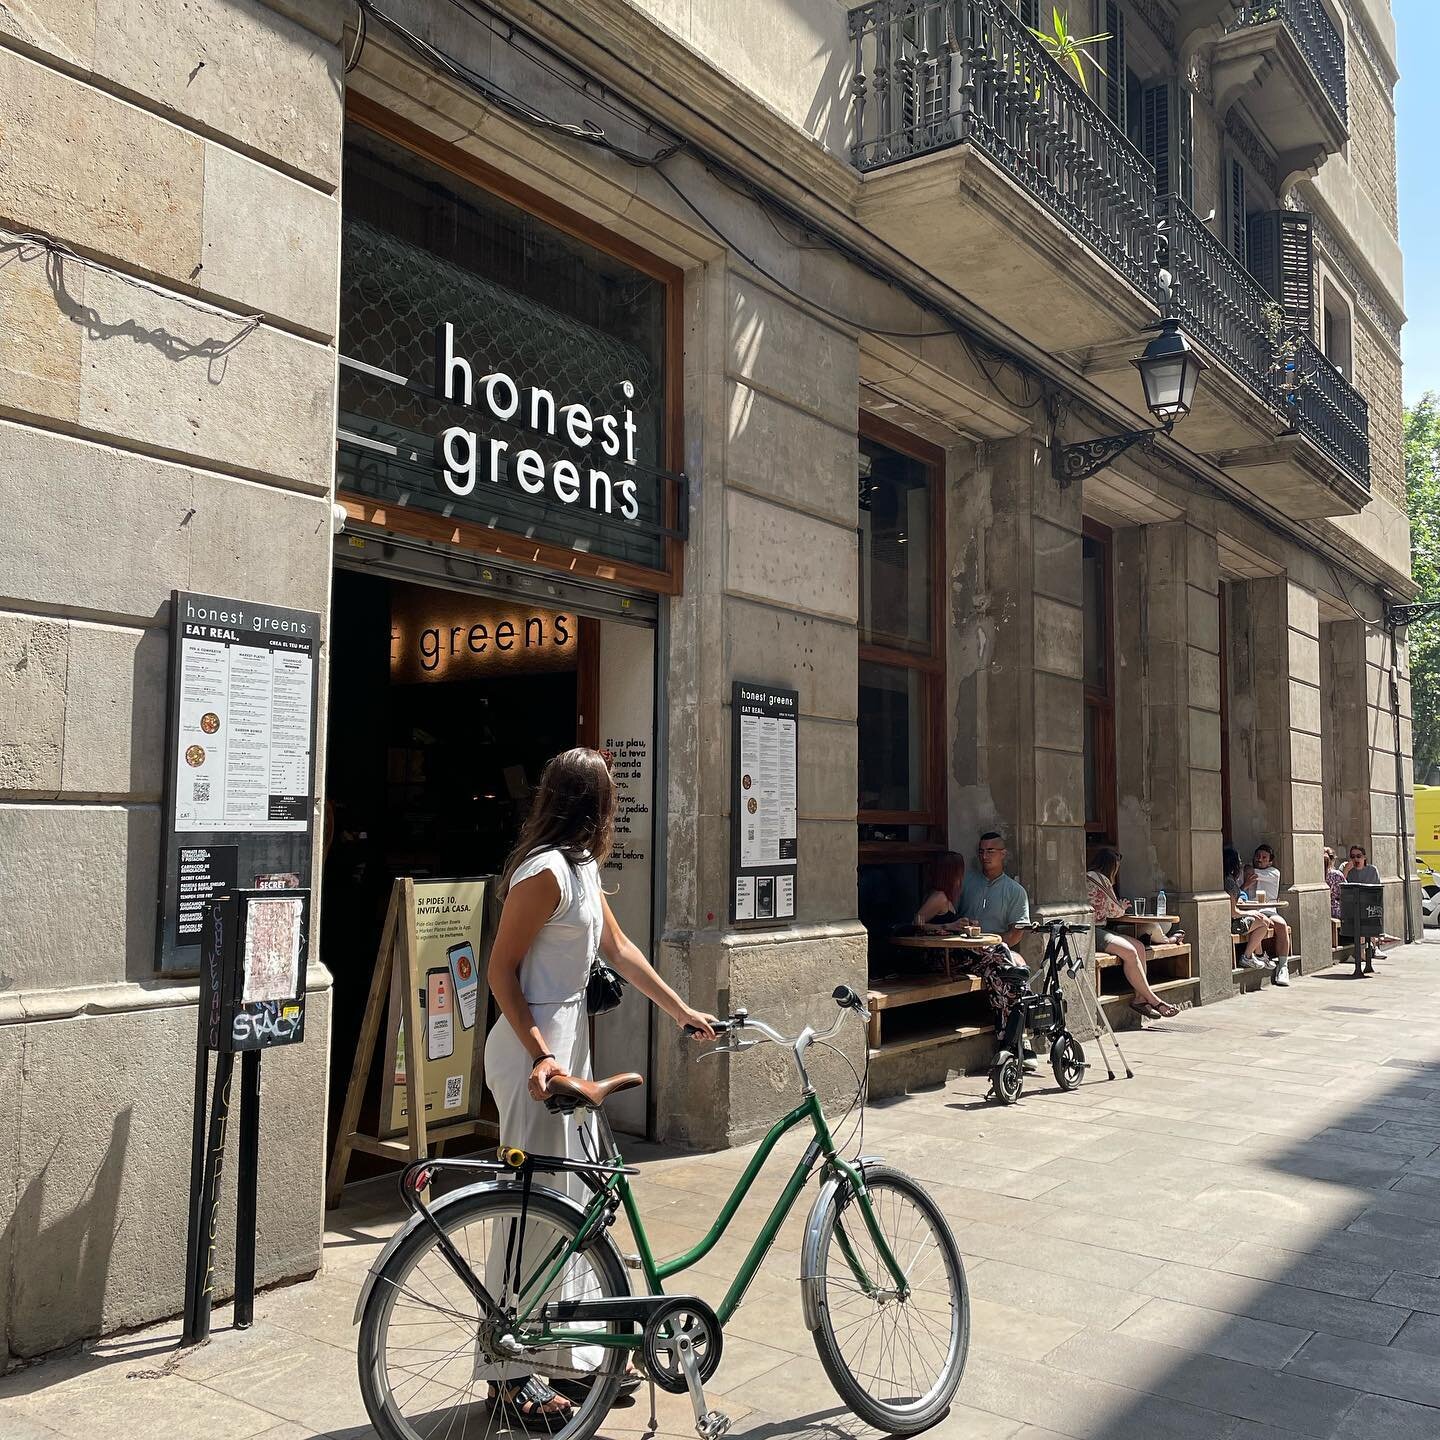 ⚡️ GREEN BIKE TIP ⚡️ 

While cycling through Barcelona, want to take a break and have lunch somewhere? One of Green Bikes&rsquo; favourite spots is the restaurant @honestgreens 🌱 

The El Born location is highly recommended because it features a lov